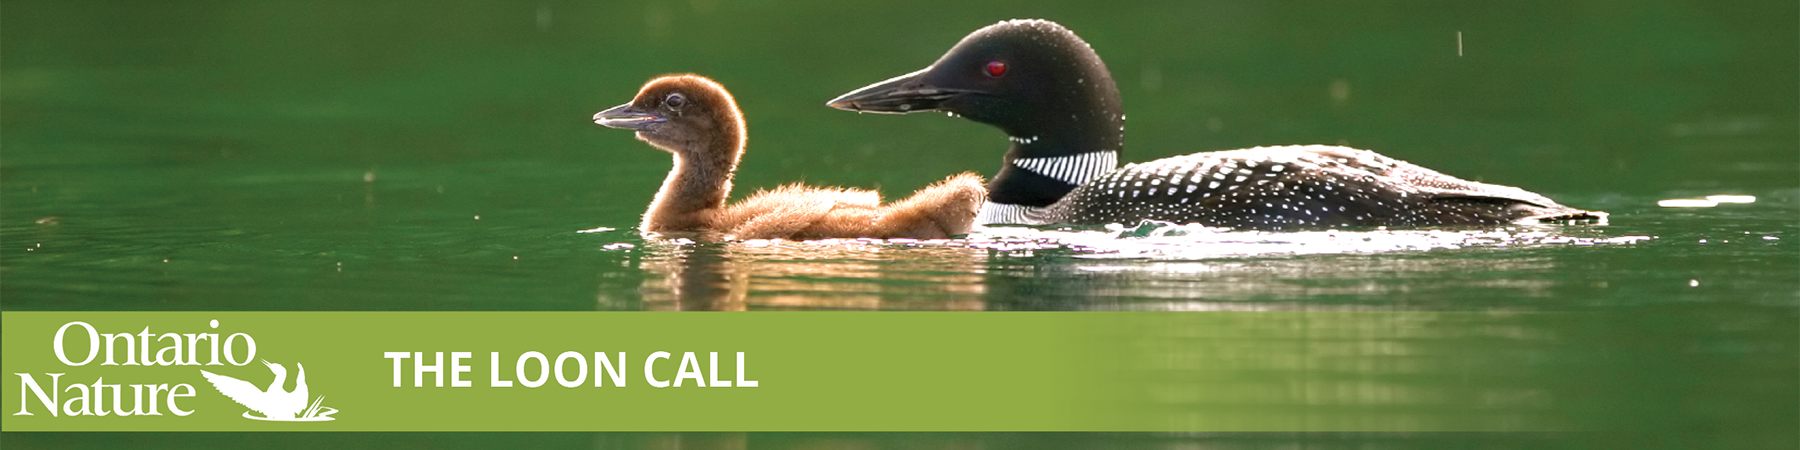 Loon Call - Ontario Nature's Newsletter